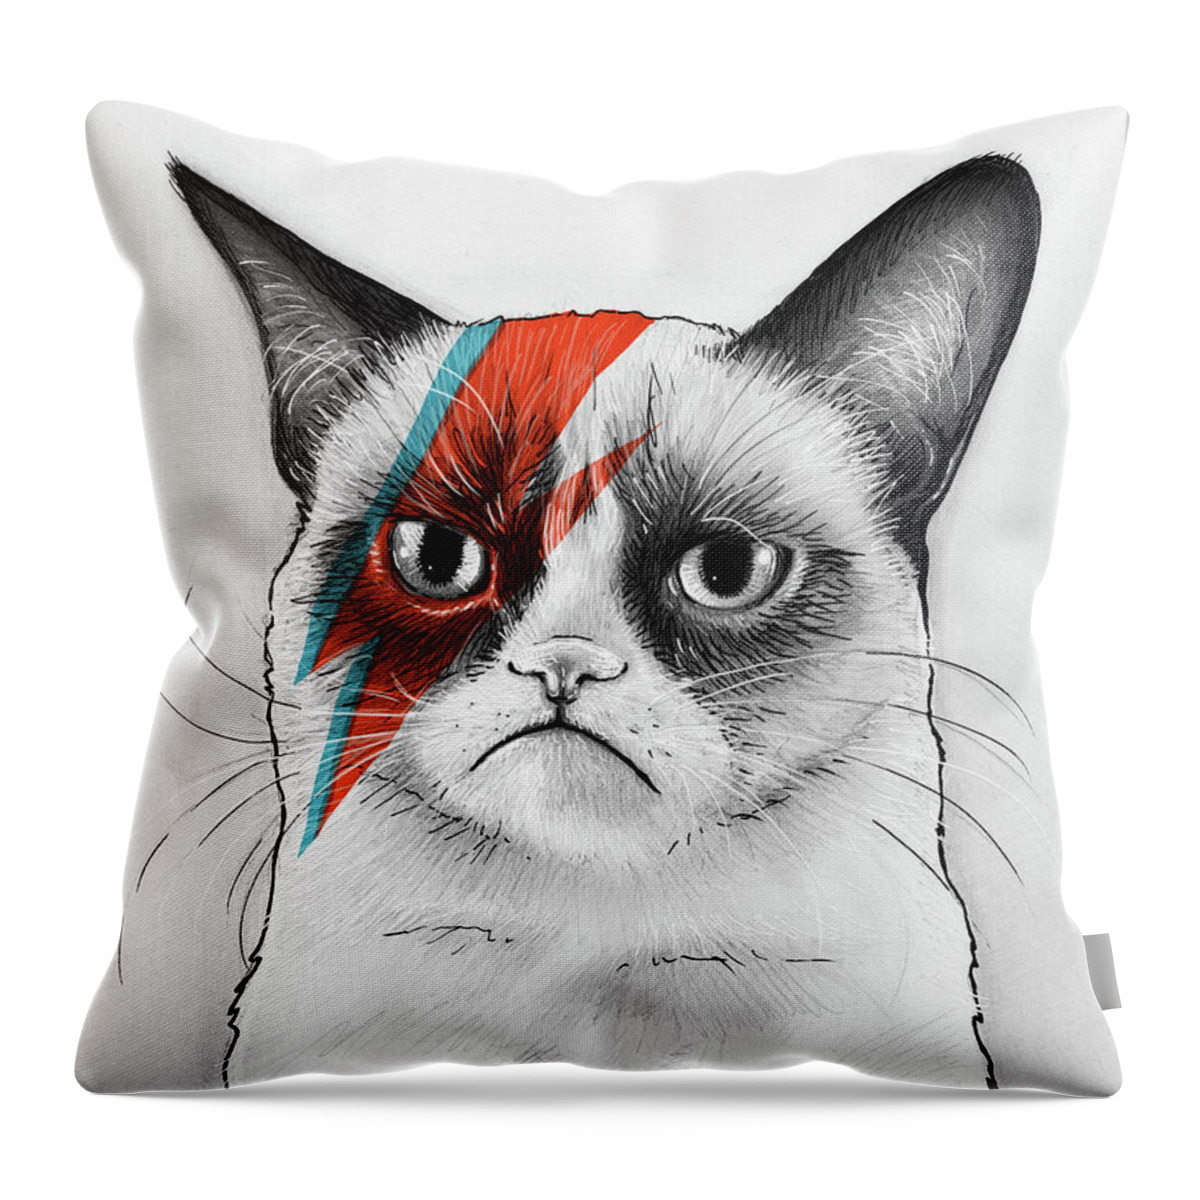 Grumpy Cat Throw Pillow featuring the drawing Grumpy Cat as David Bowie by Olga Shvartsur